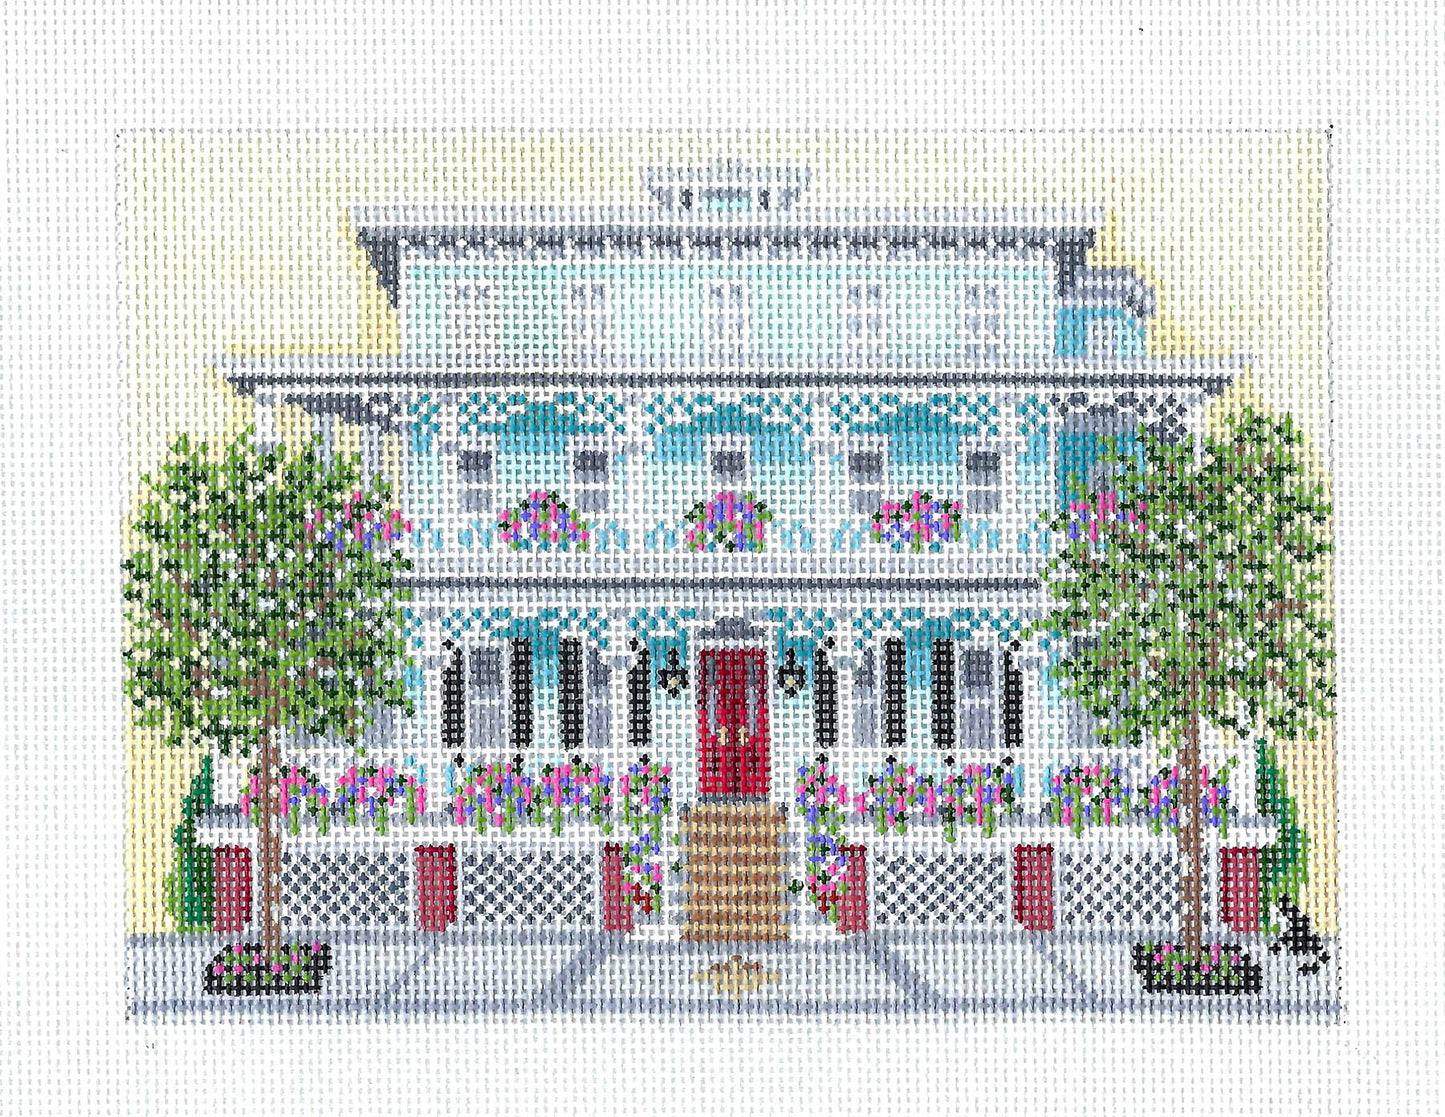 The Virginia Hotel, in Cape May, New Jersey 18m handpainted Needlepoint Canvas by Needle Crossings